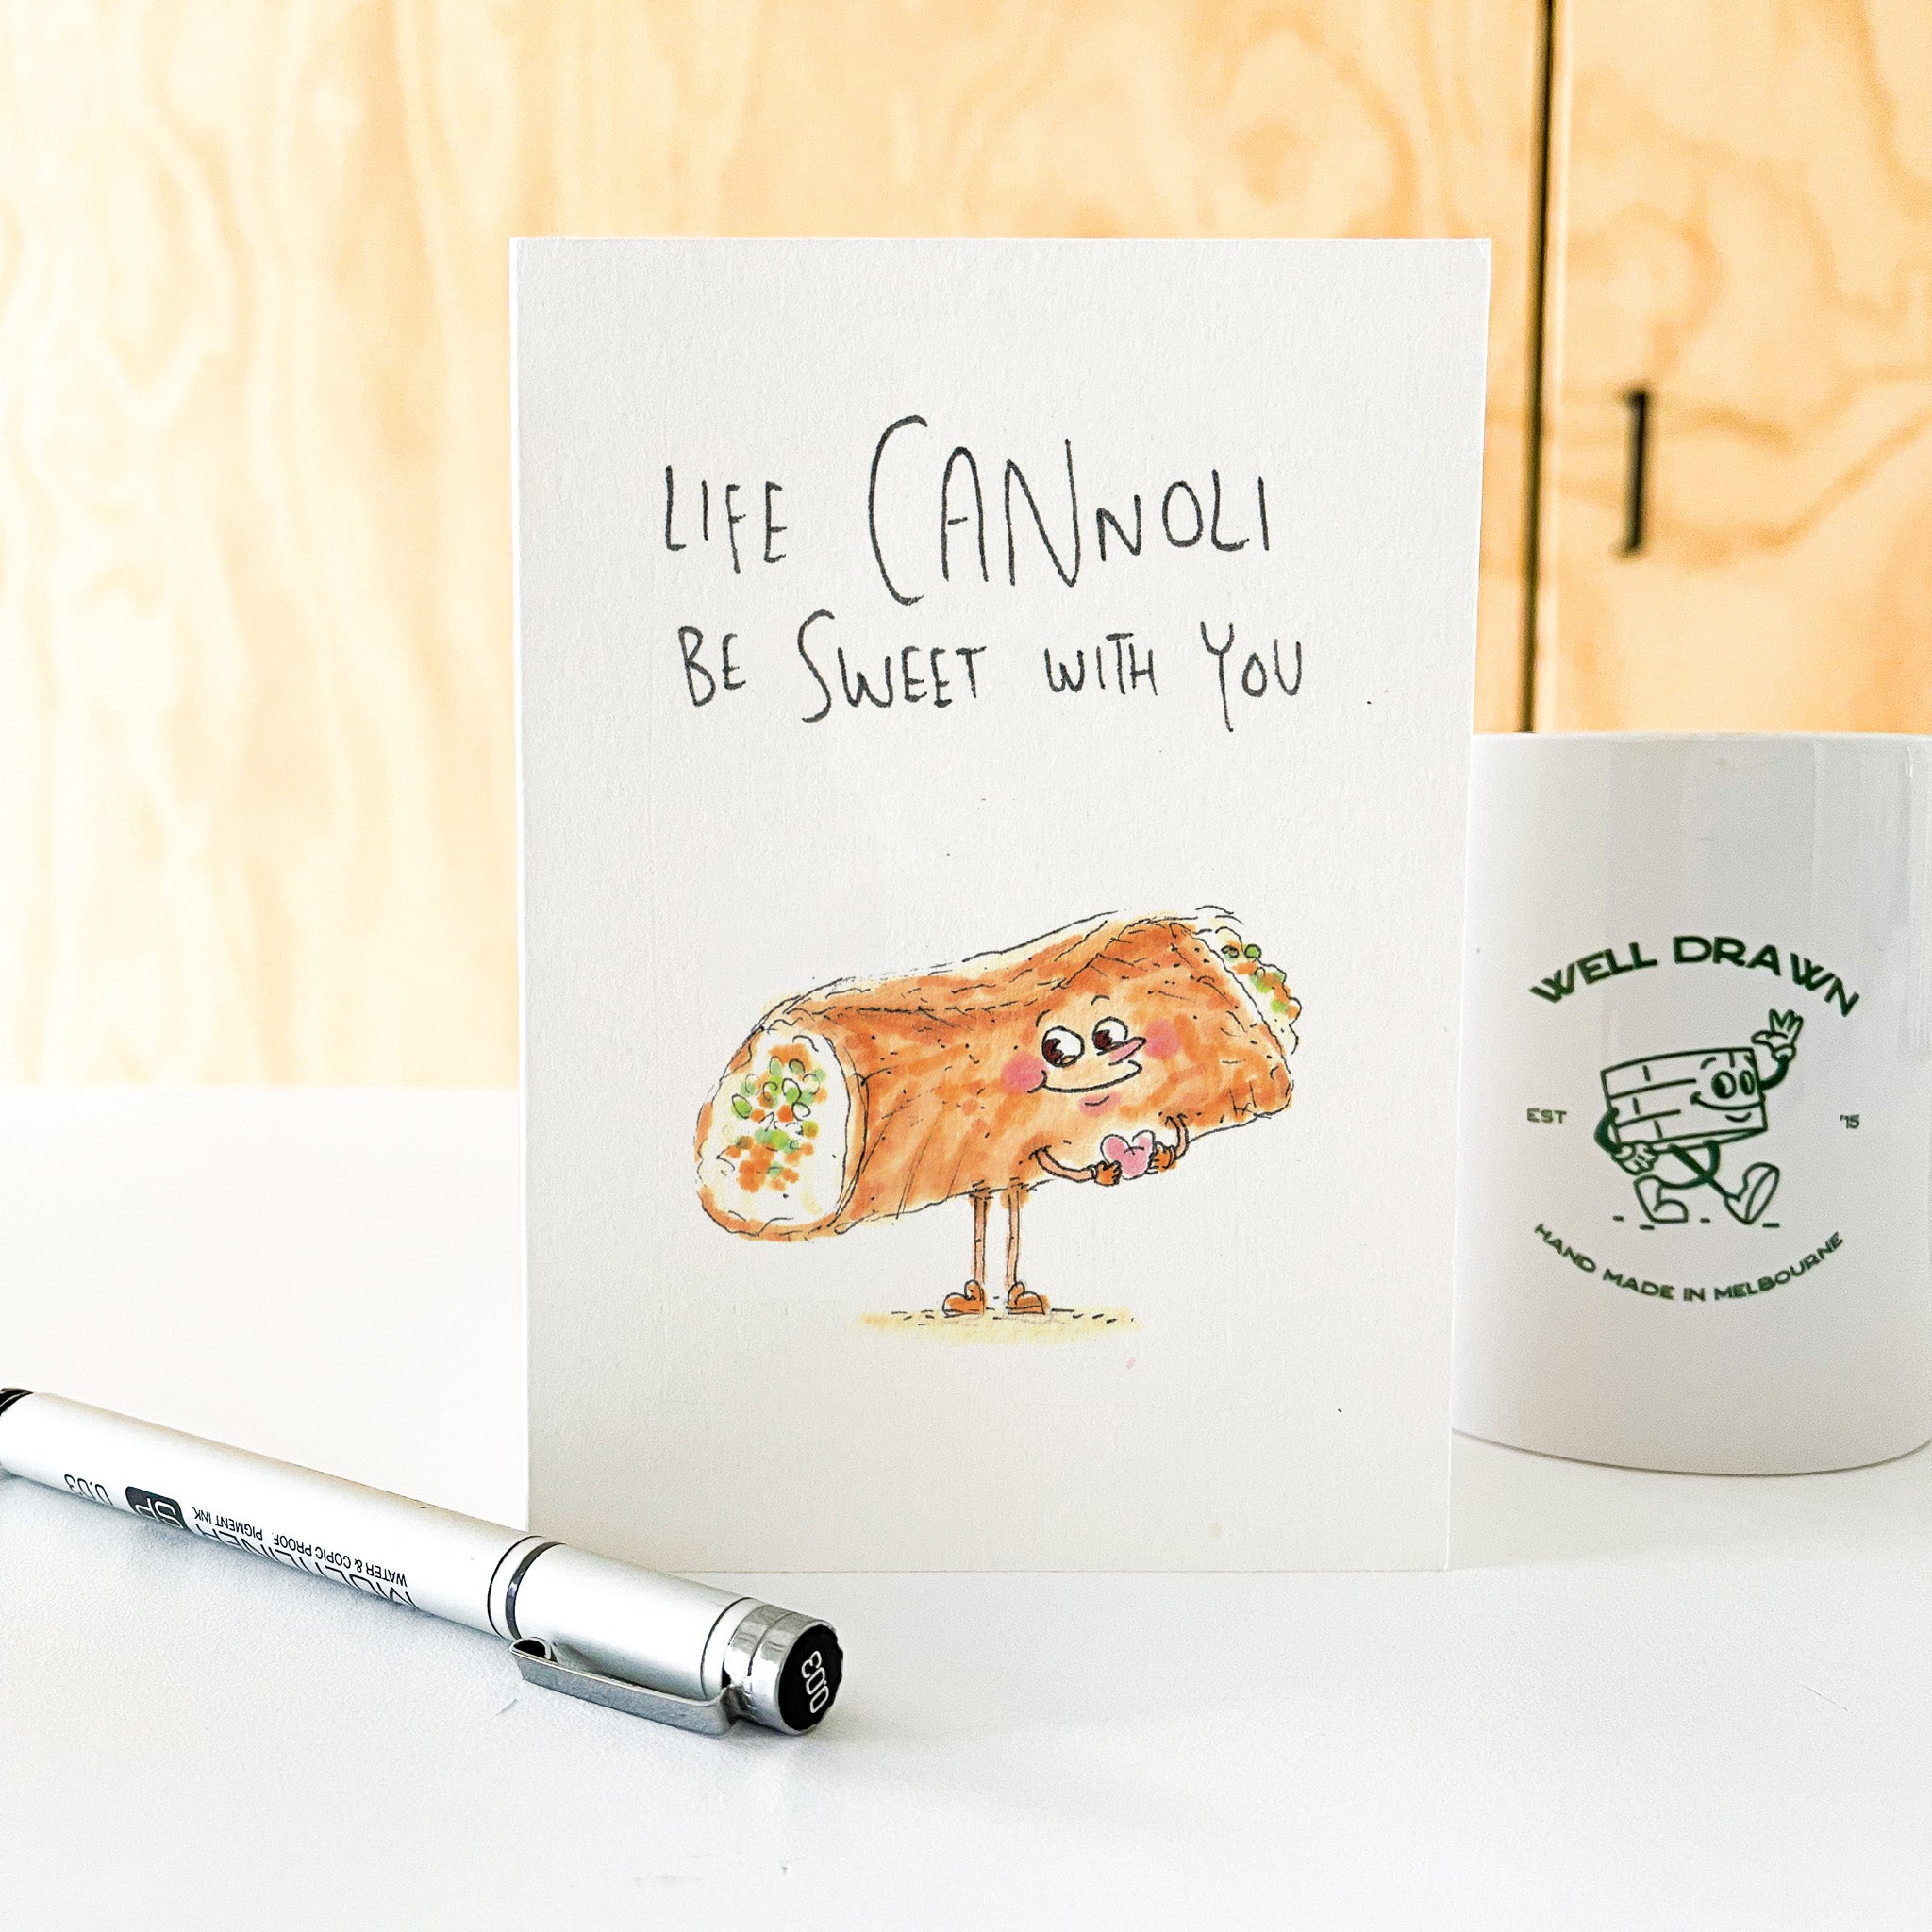 Life Cannoli Be Sweet With You